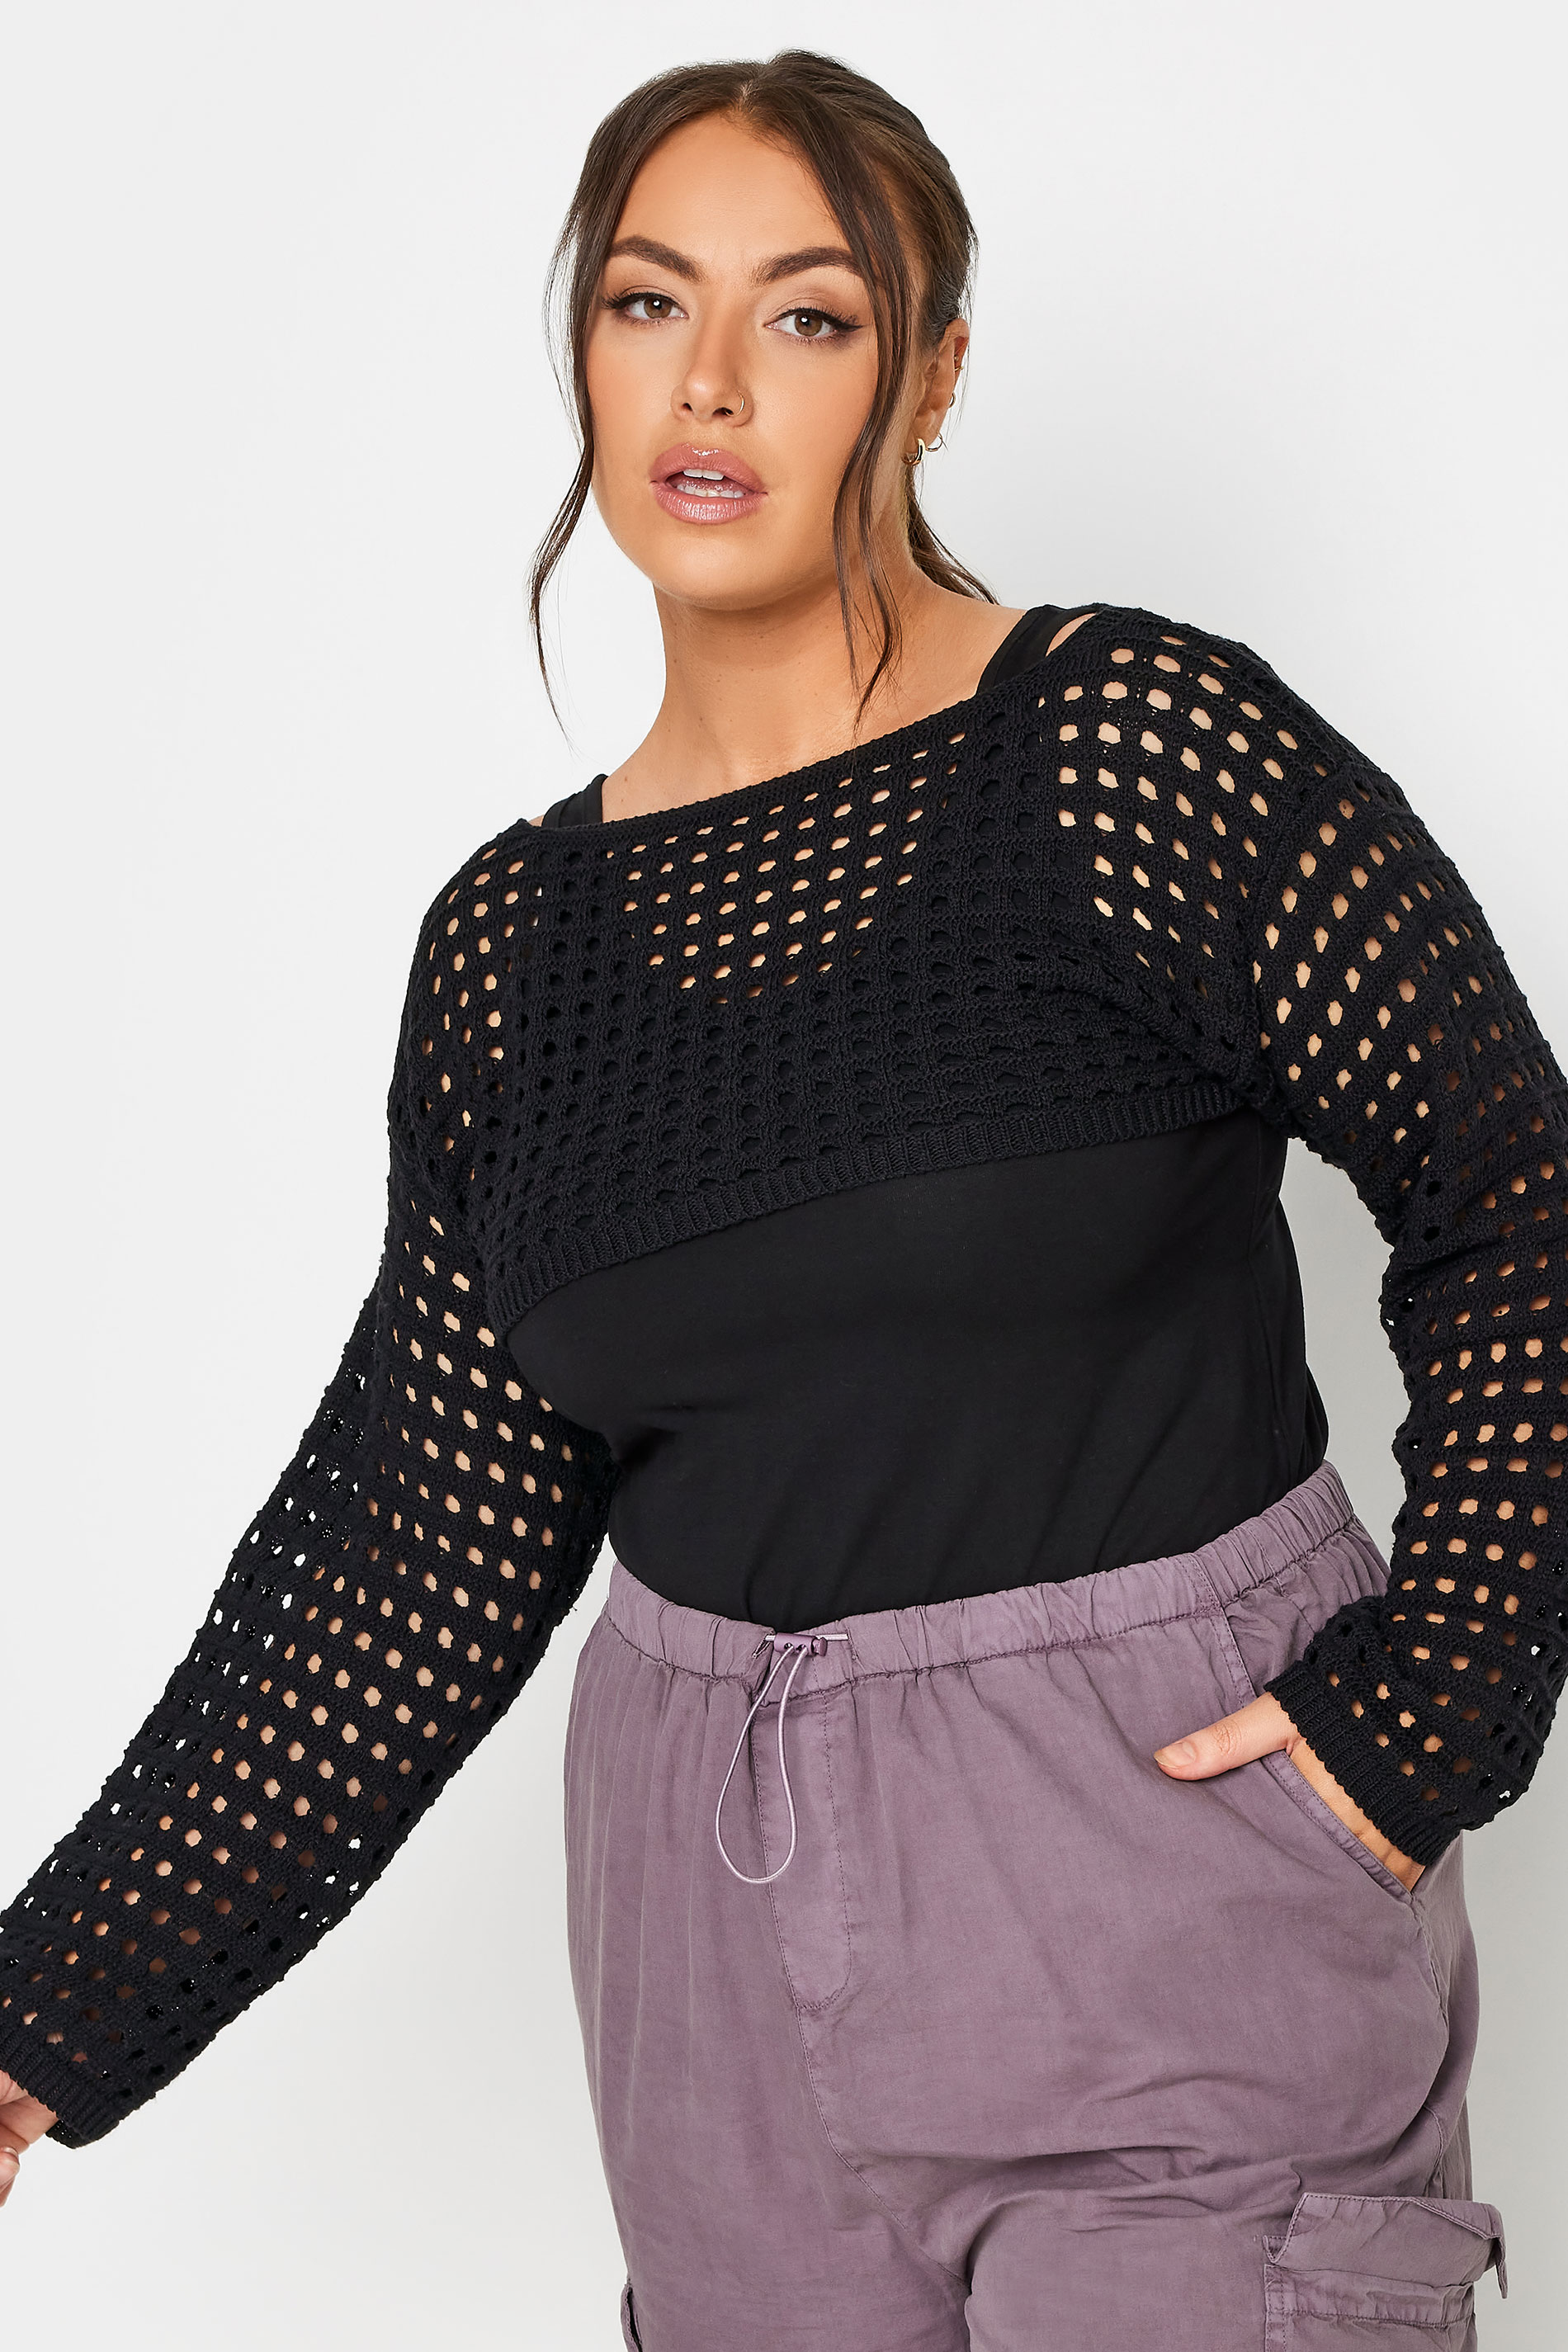 LIMITED COLLECTION Plus Size Black Ultra Cropped Crochet Knit Arm Warmer | Yours Clothing 1